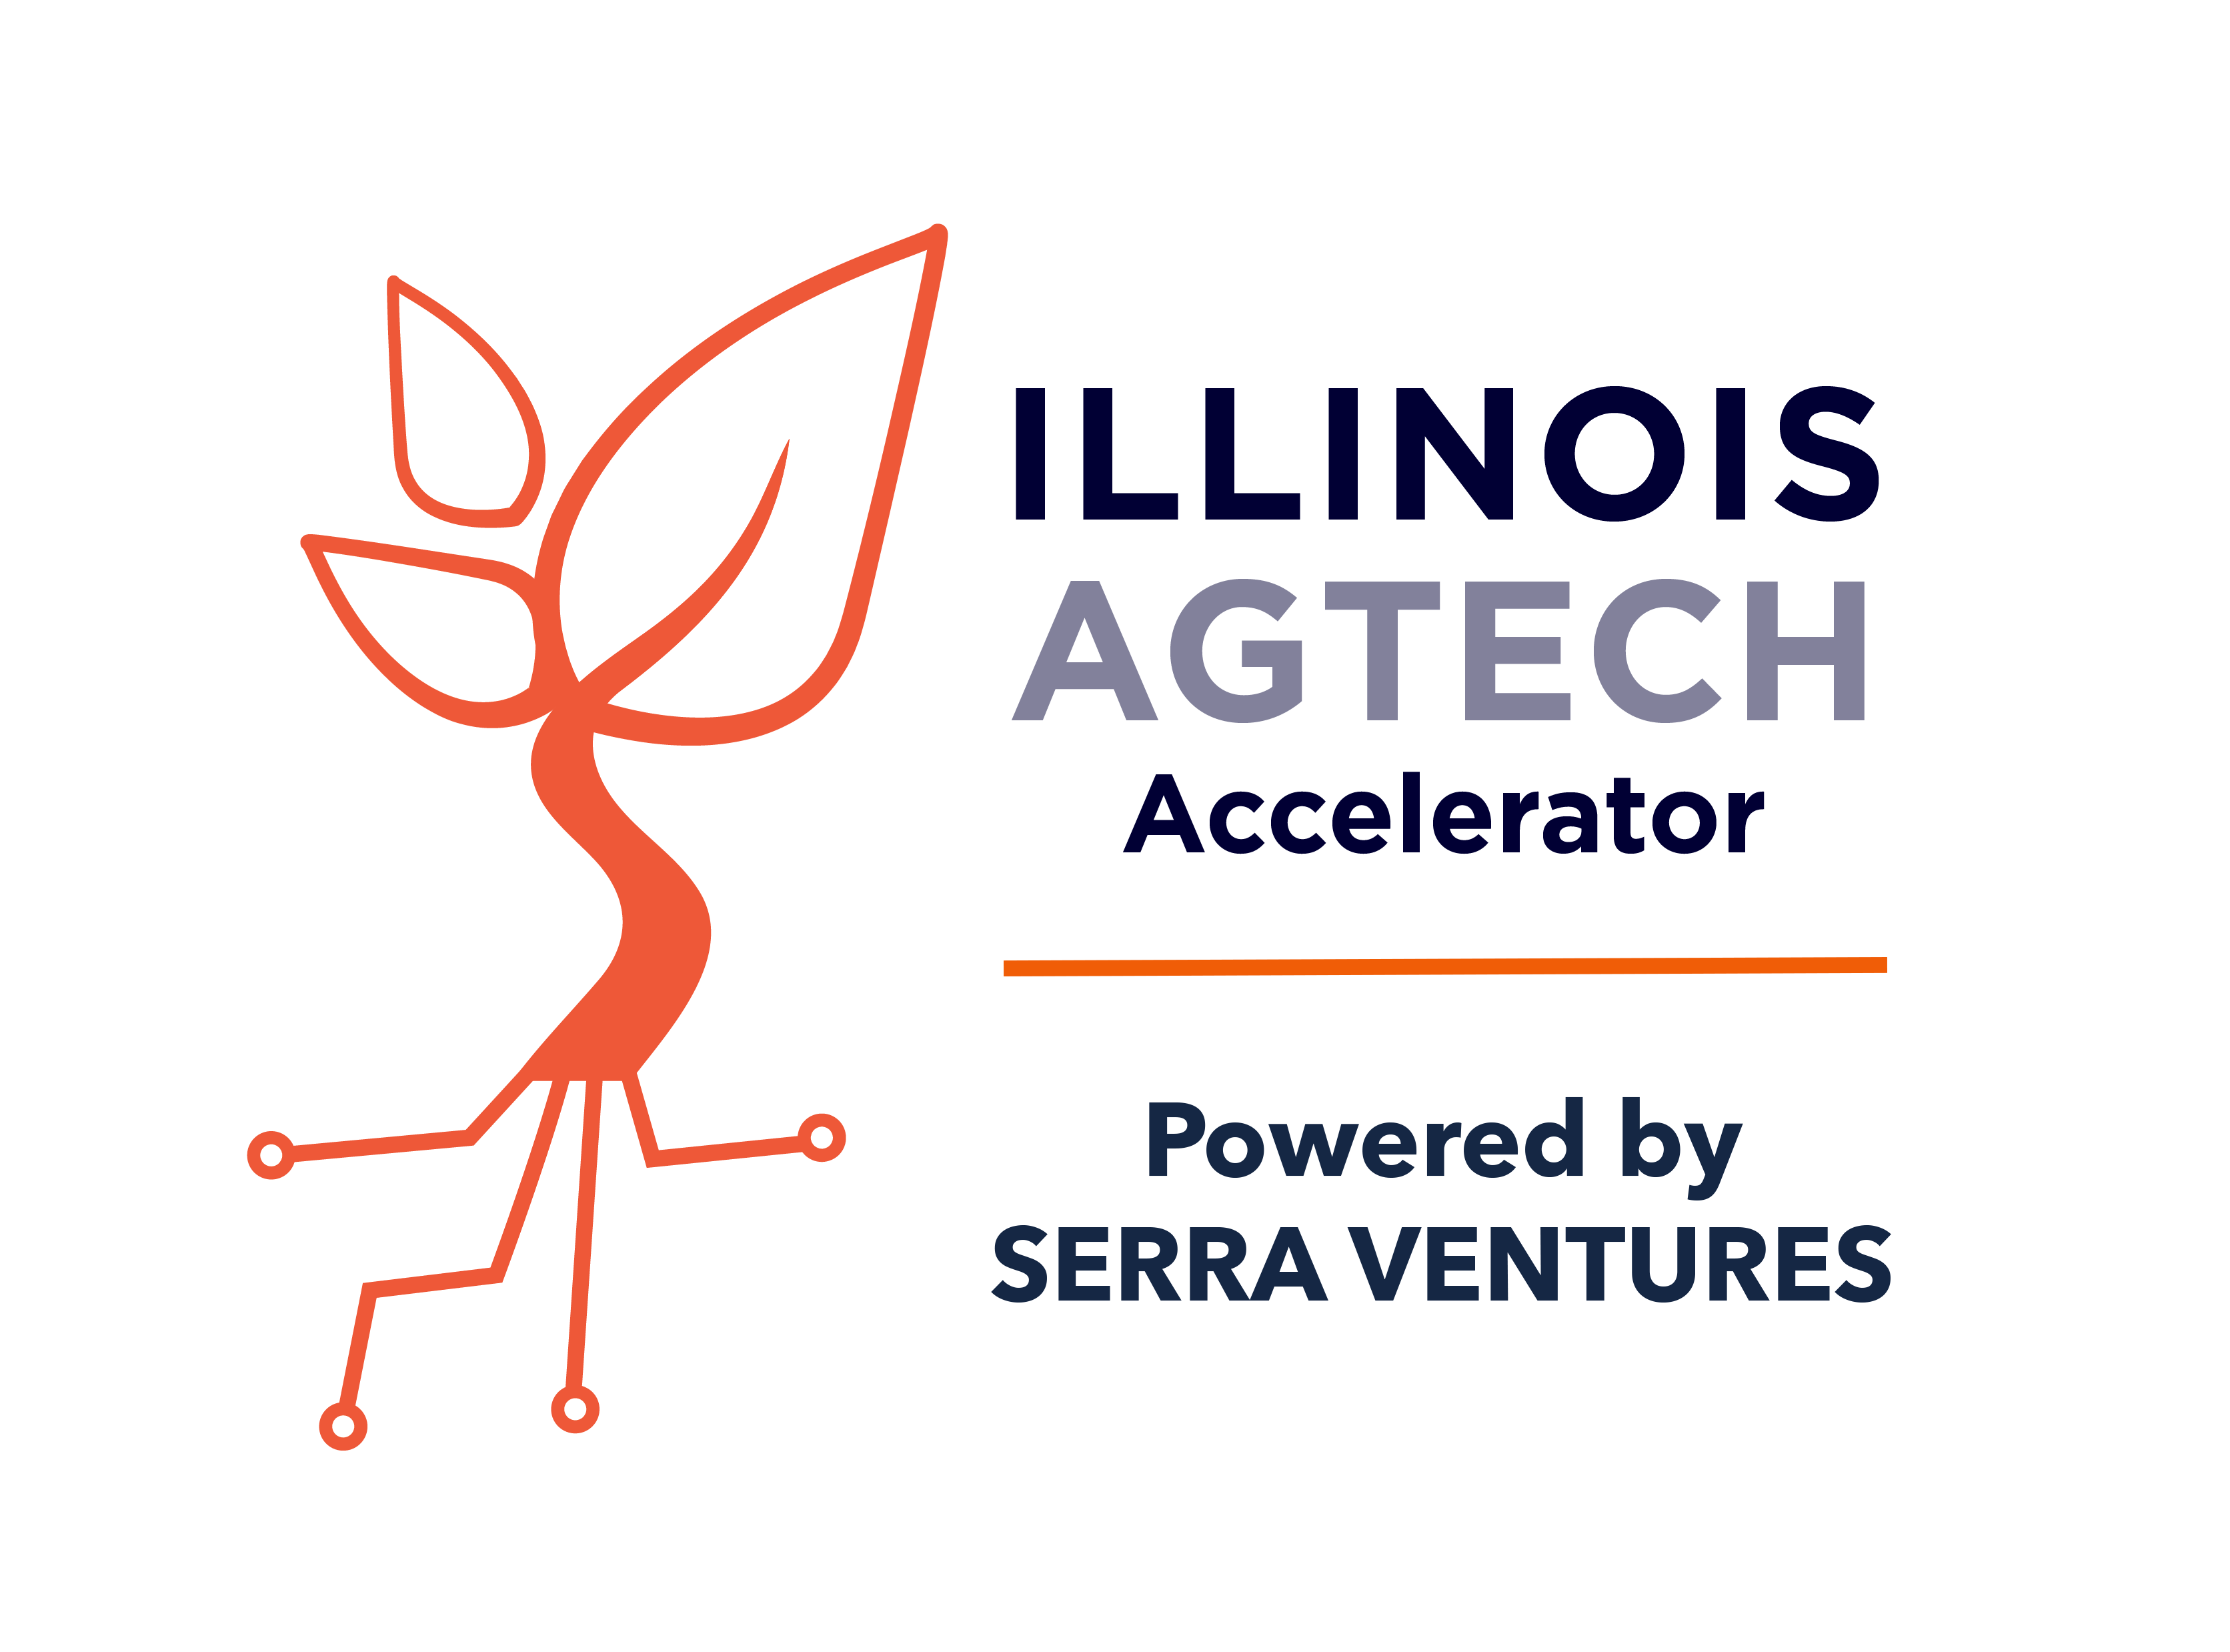 Illinois Agtech Accelerator Color Powered by Serra Ventures